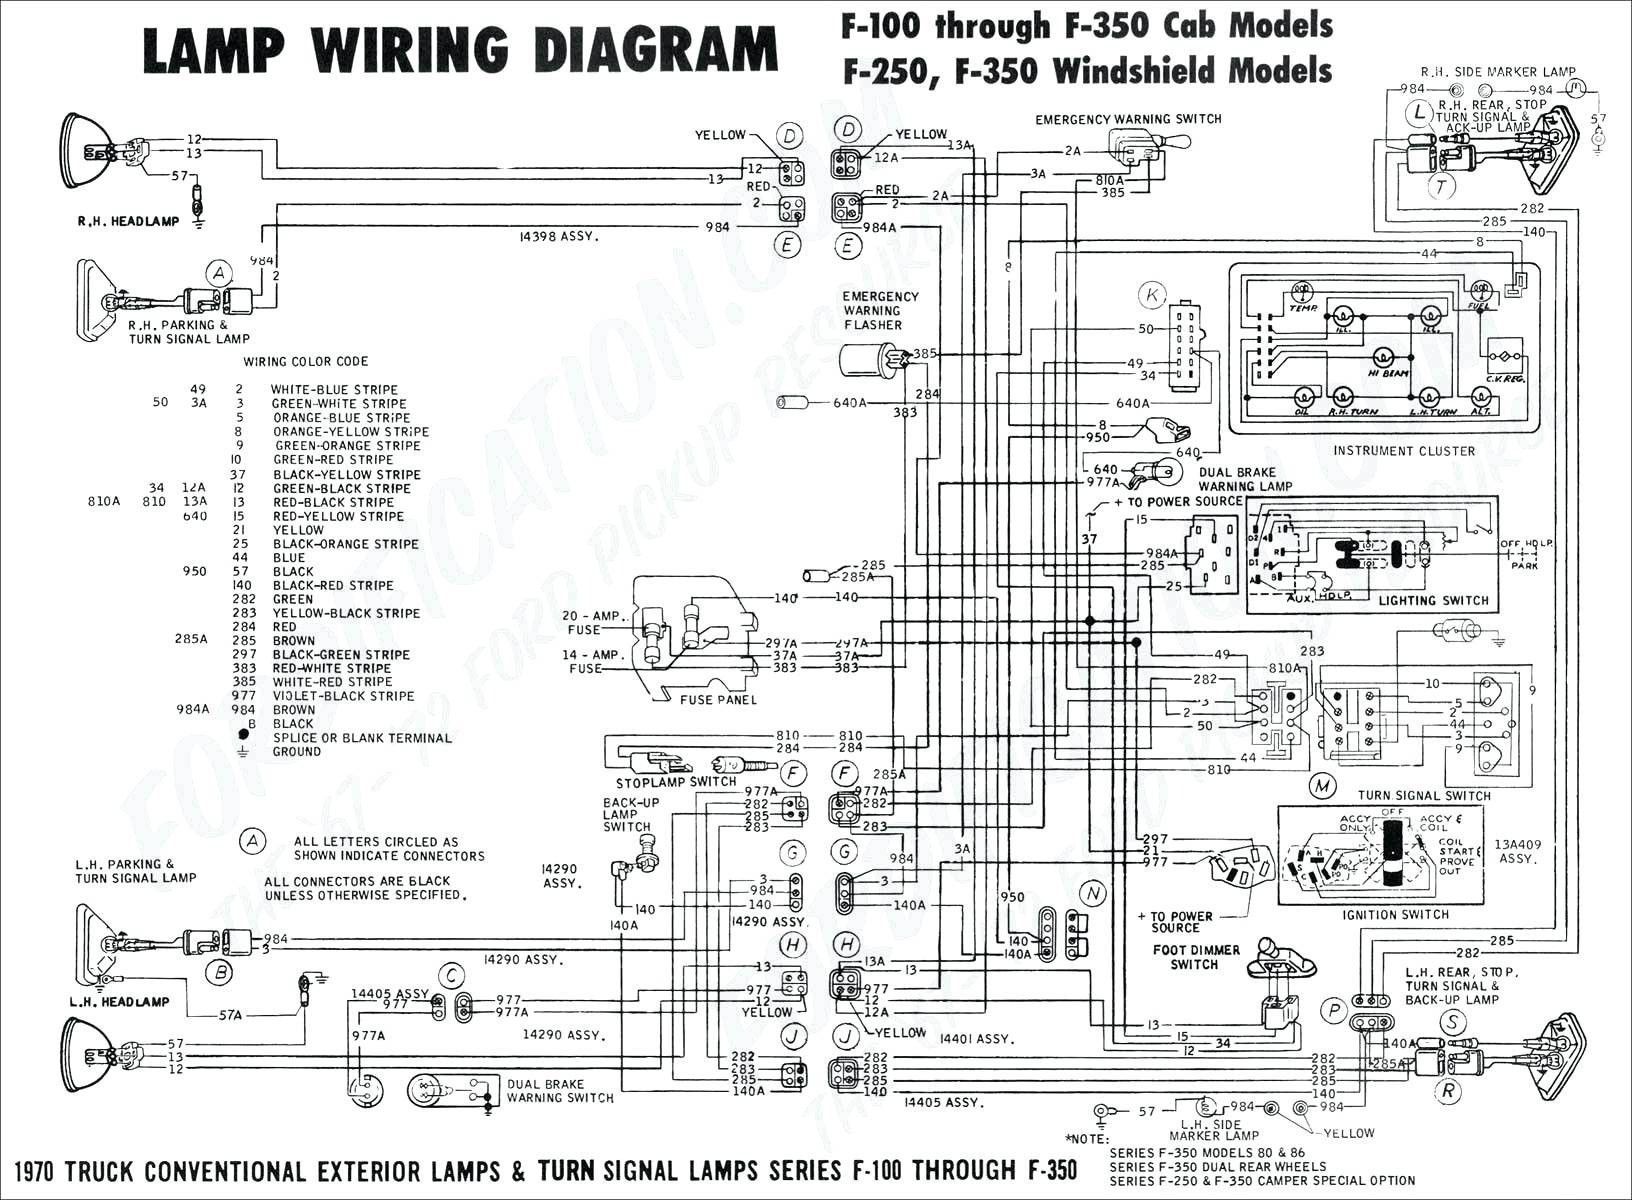 Electric Car Circuit Diagram House Electrical Wiring Diagram New Zealand Valid Trailer Wiring Of Electric Car Circuit Diagram